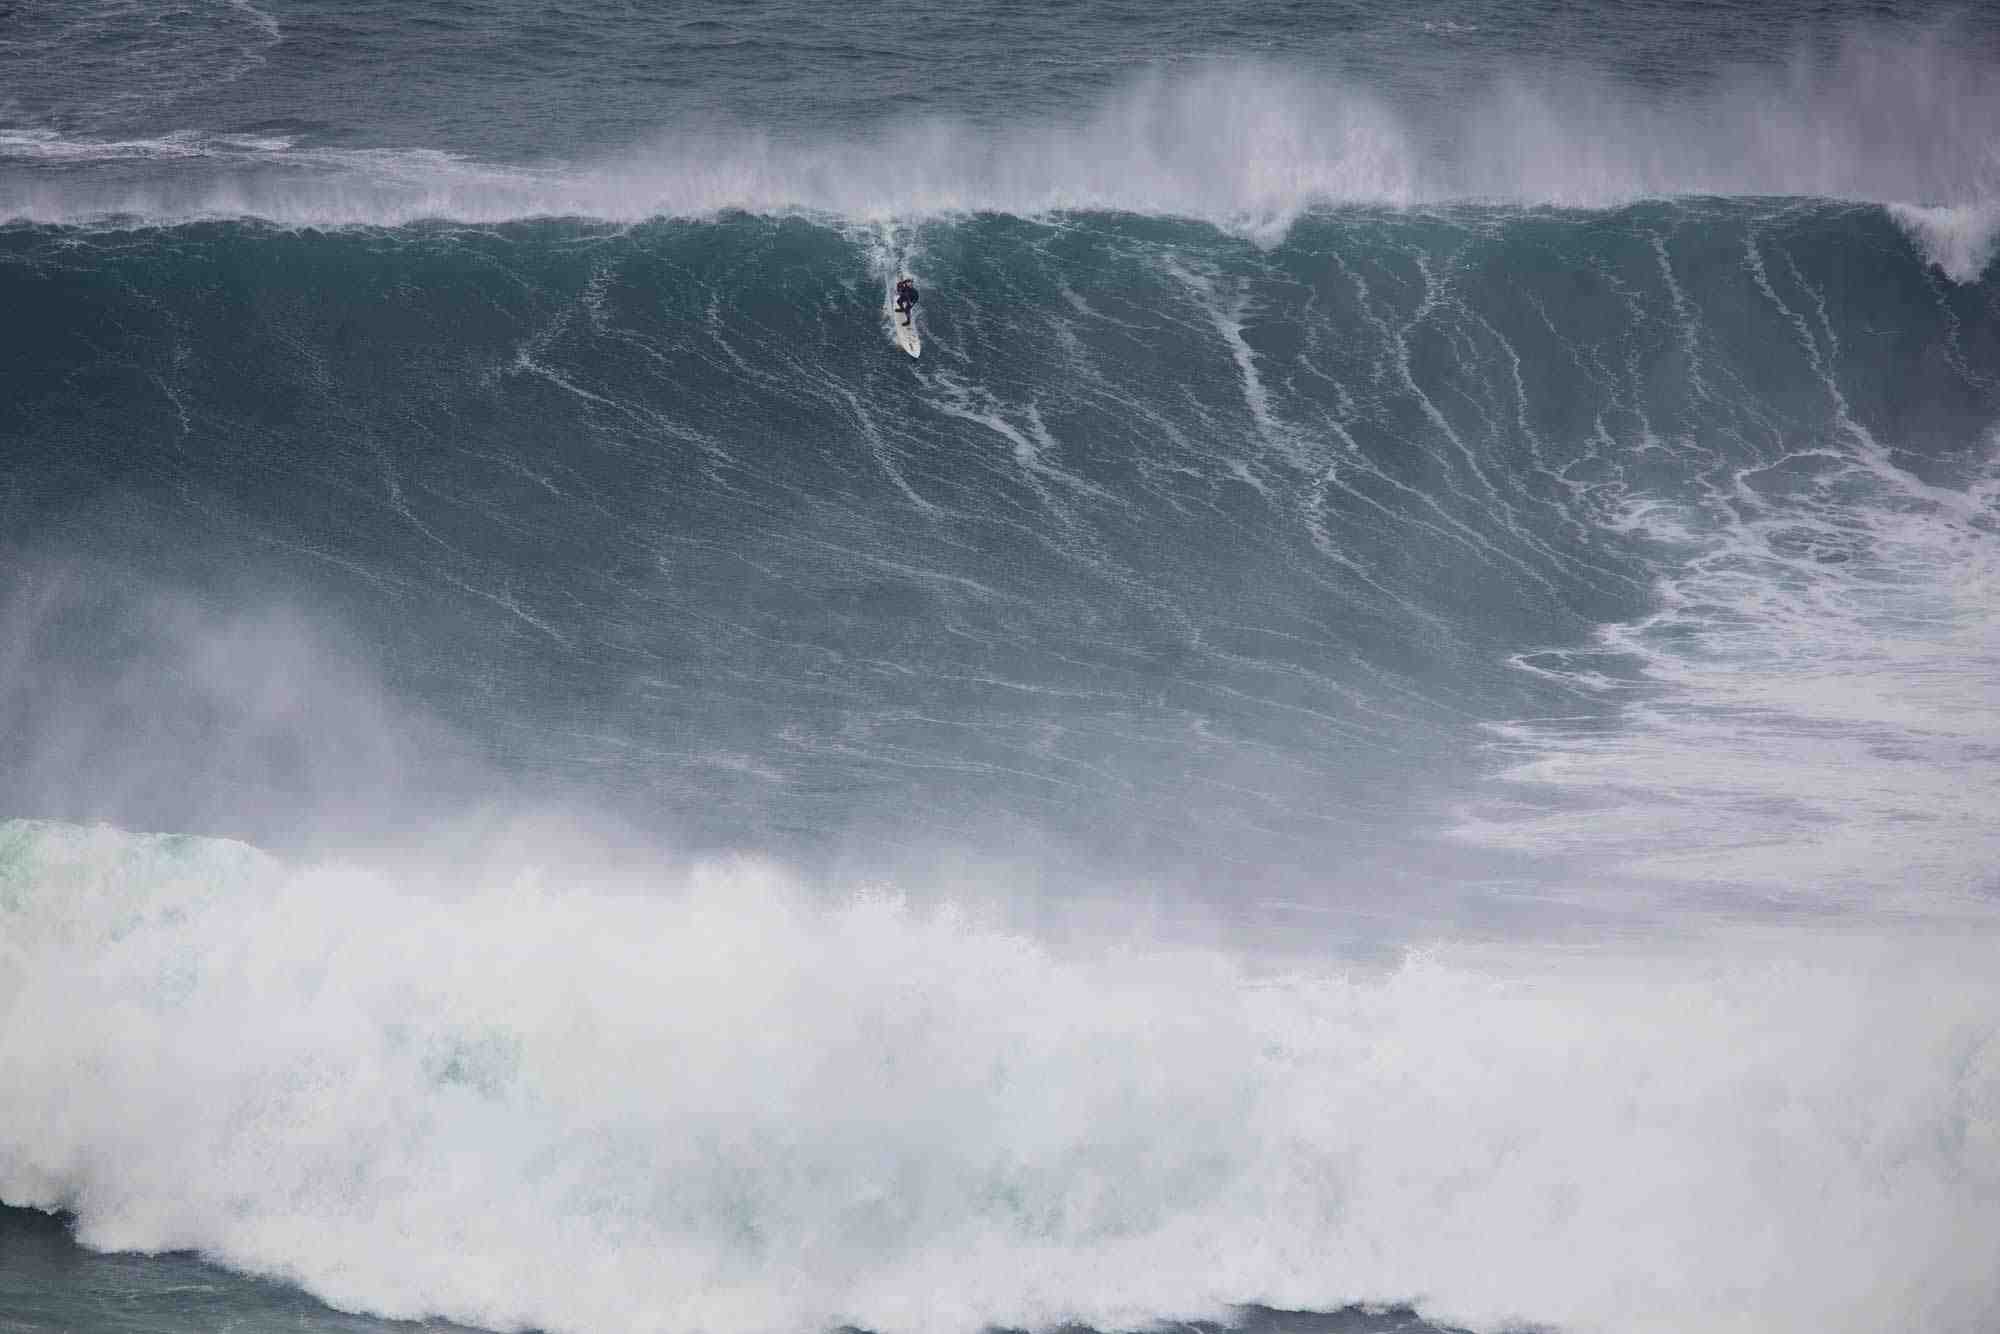 Who surfed 100 foot waves?